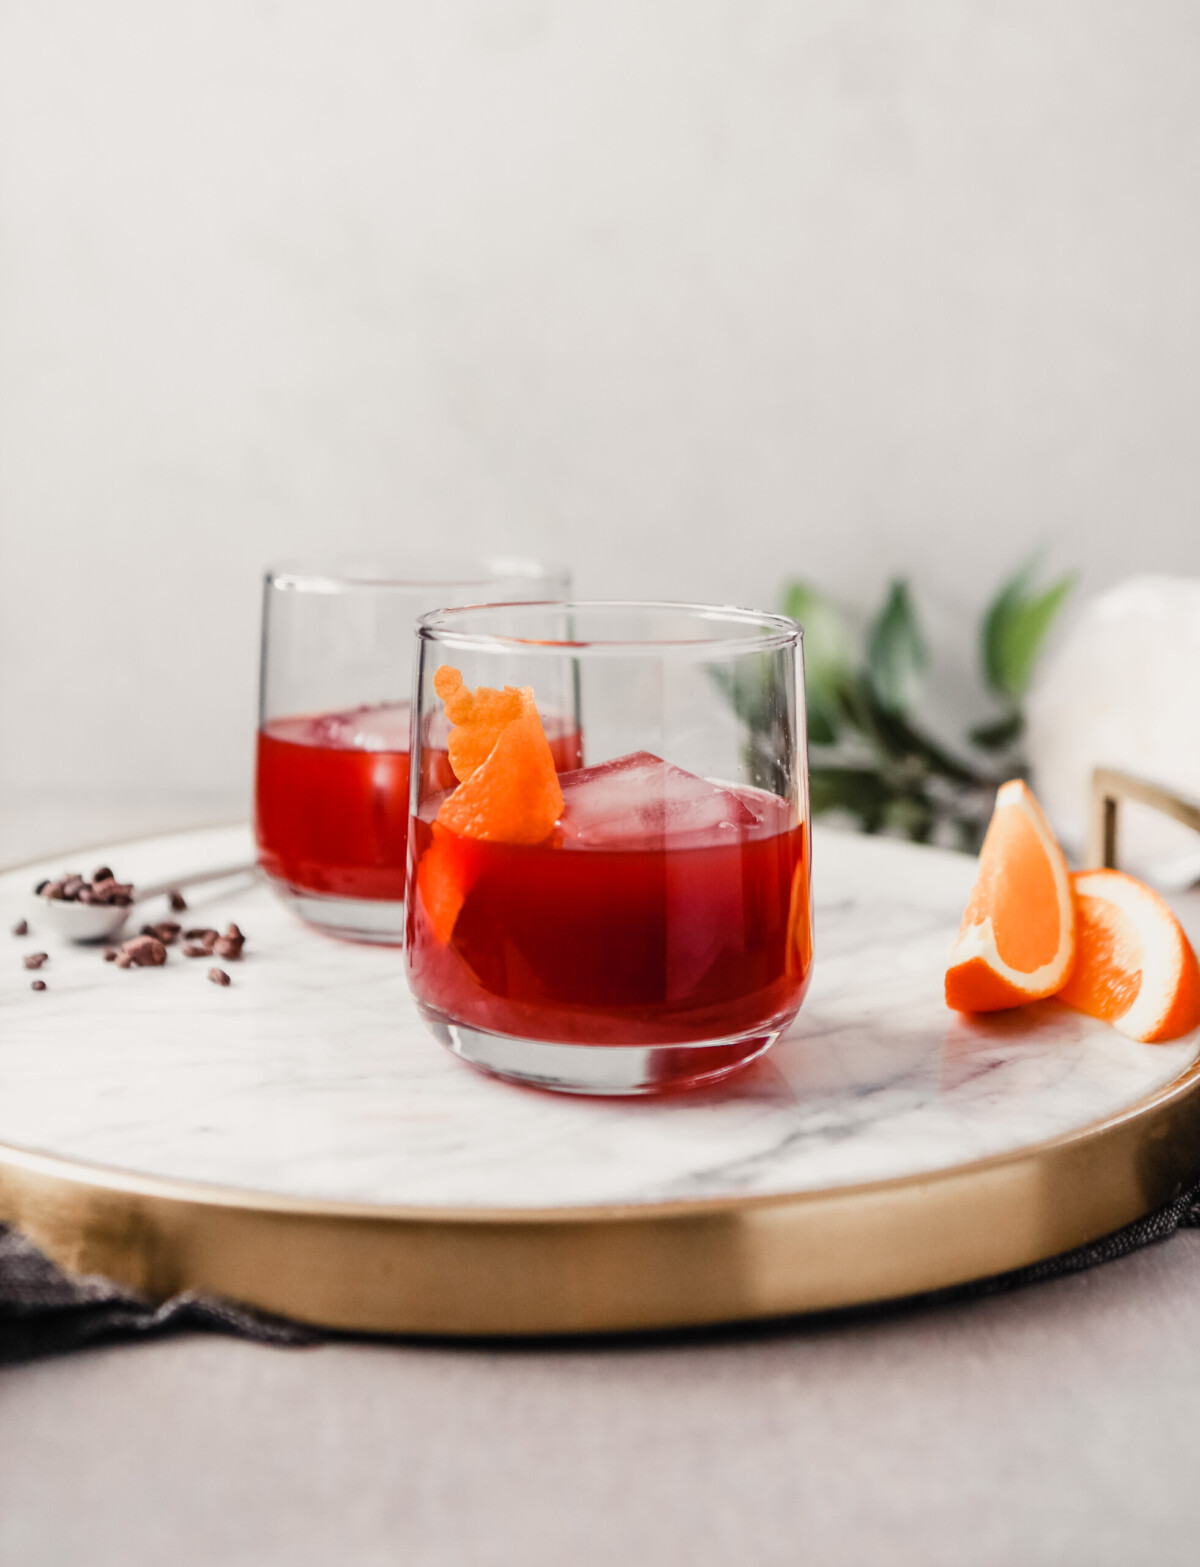 Photograph of a negroni cocktail in a rocks glass set on a white marble tray.